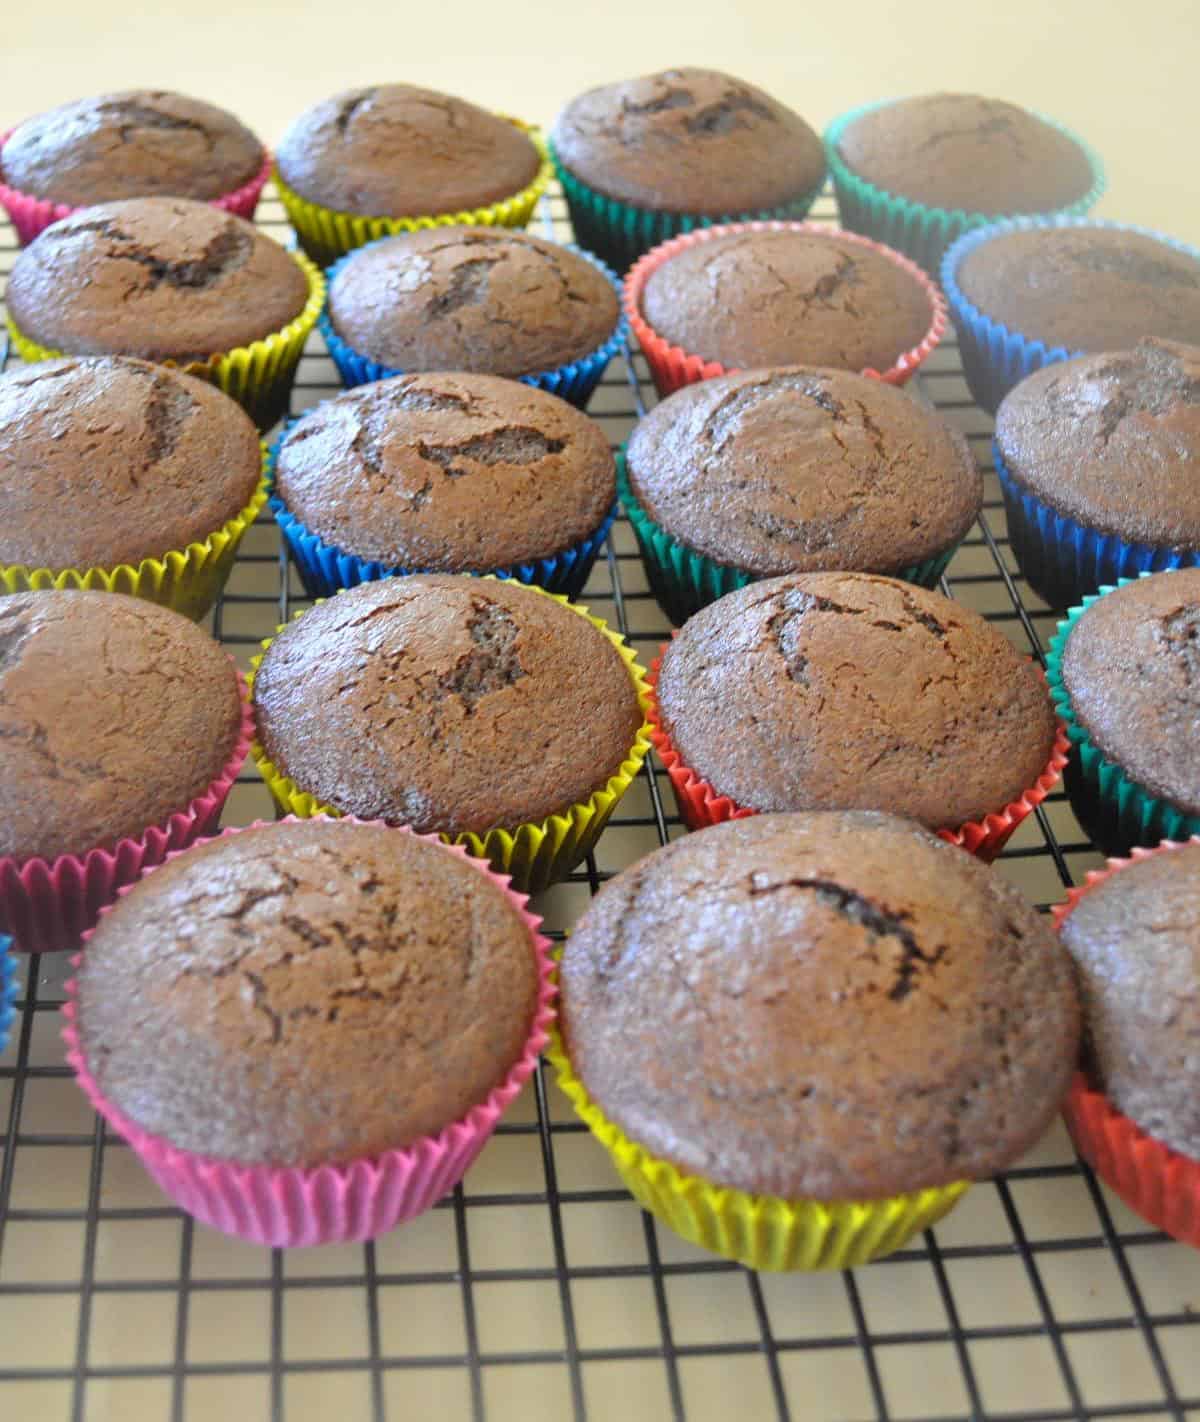  You won't be able to resist the aroma of these cupcakes baking in the oven.